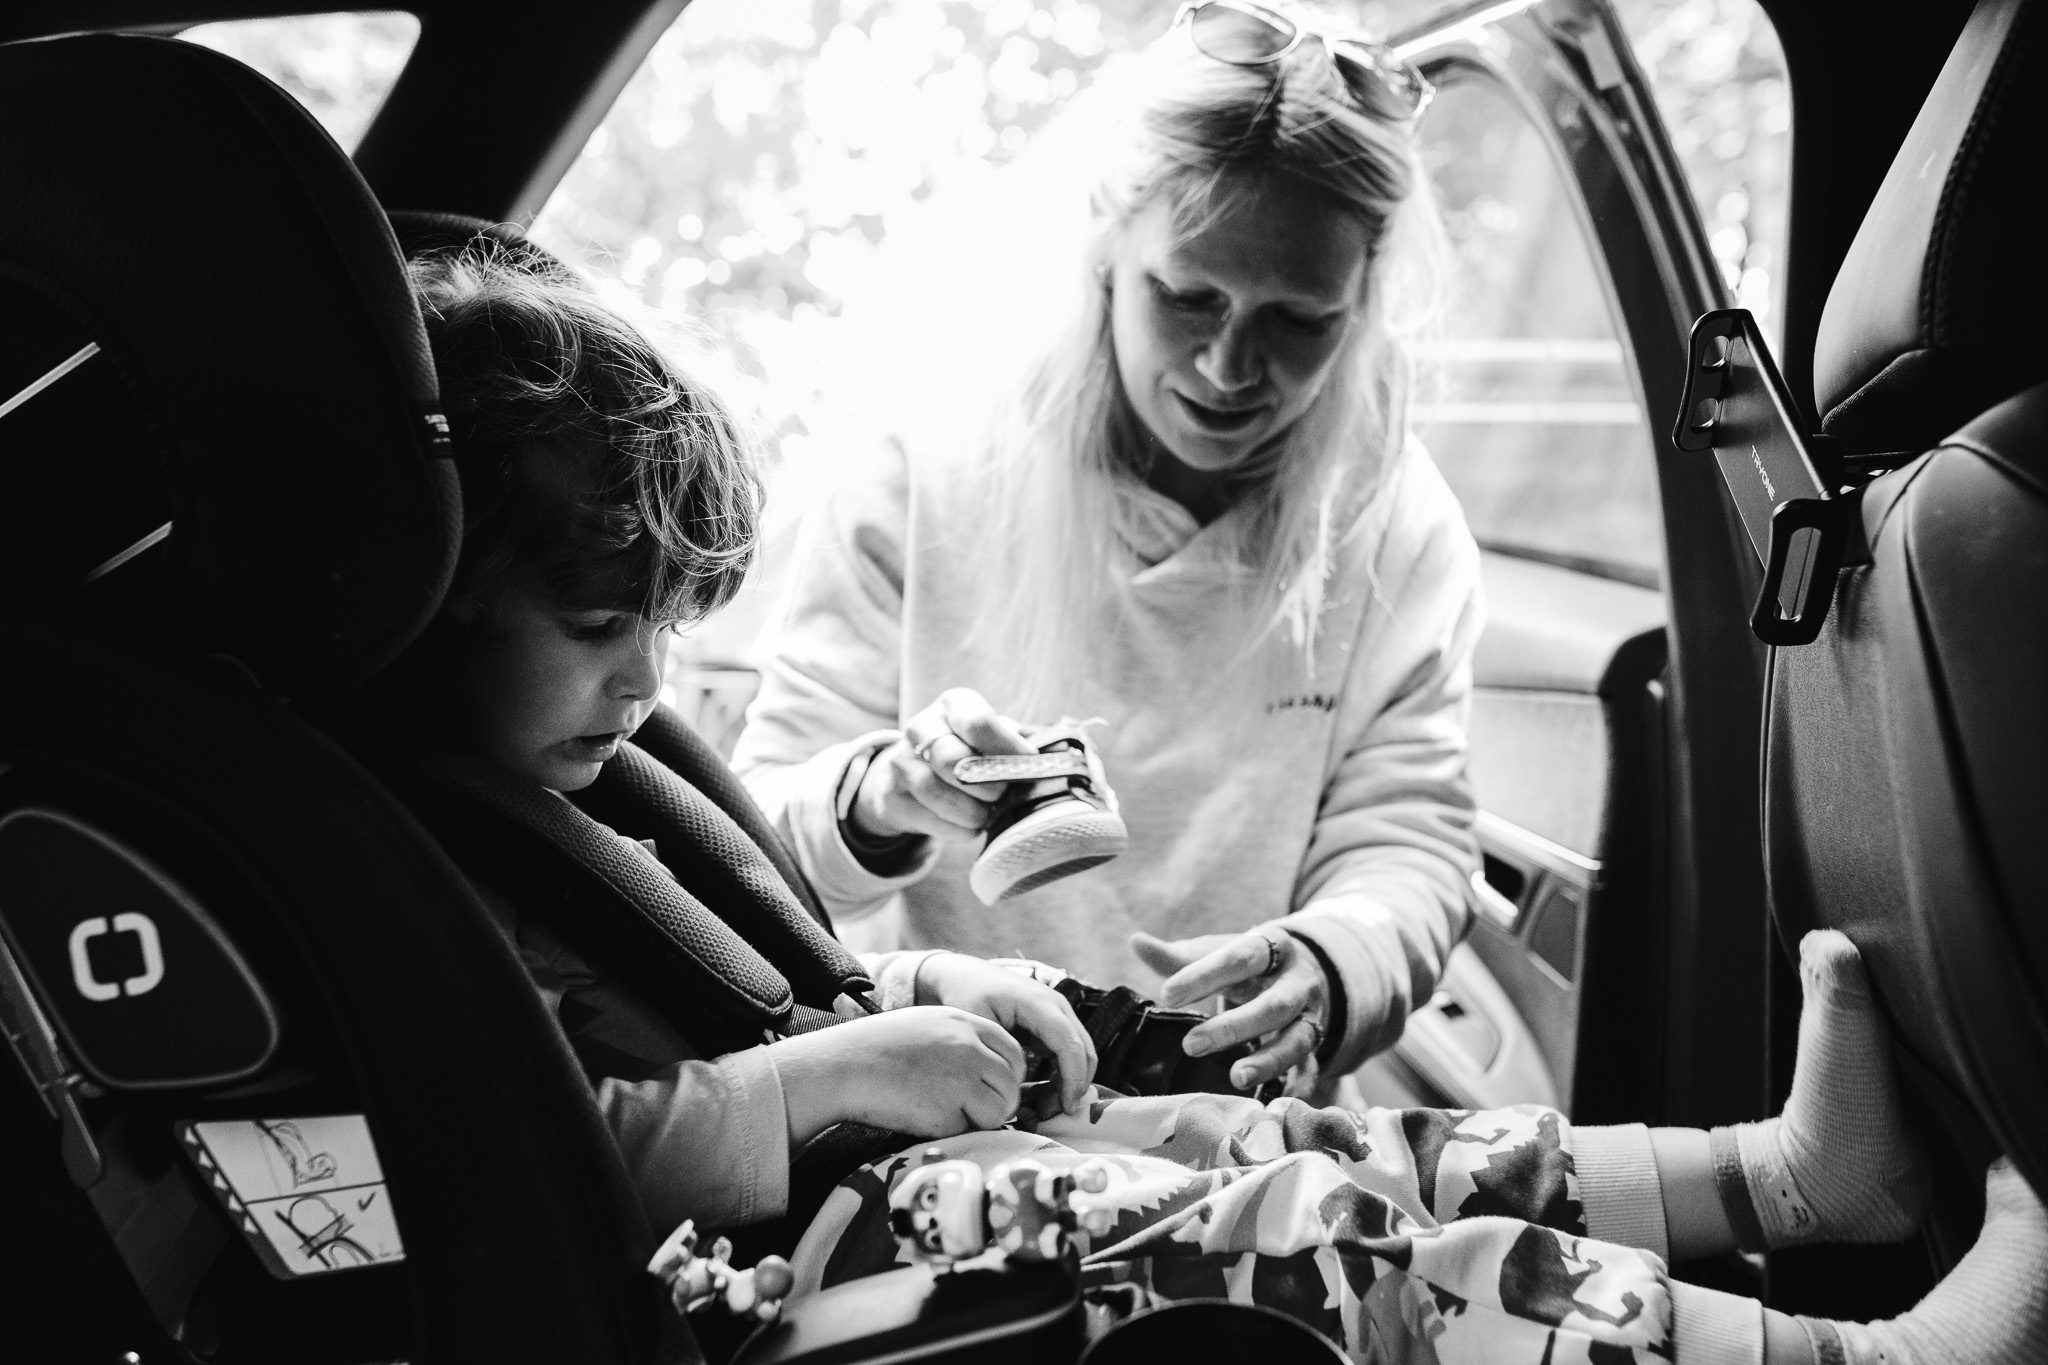 Mum is putting shoes onto her son in a car seat during a family photo session.